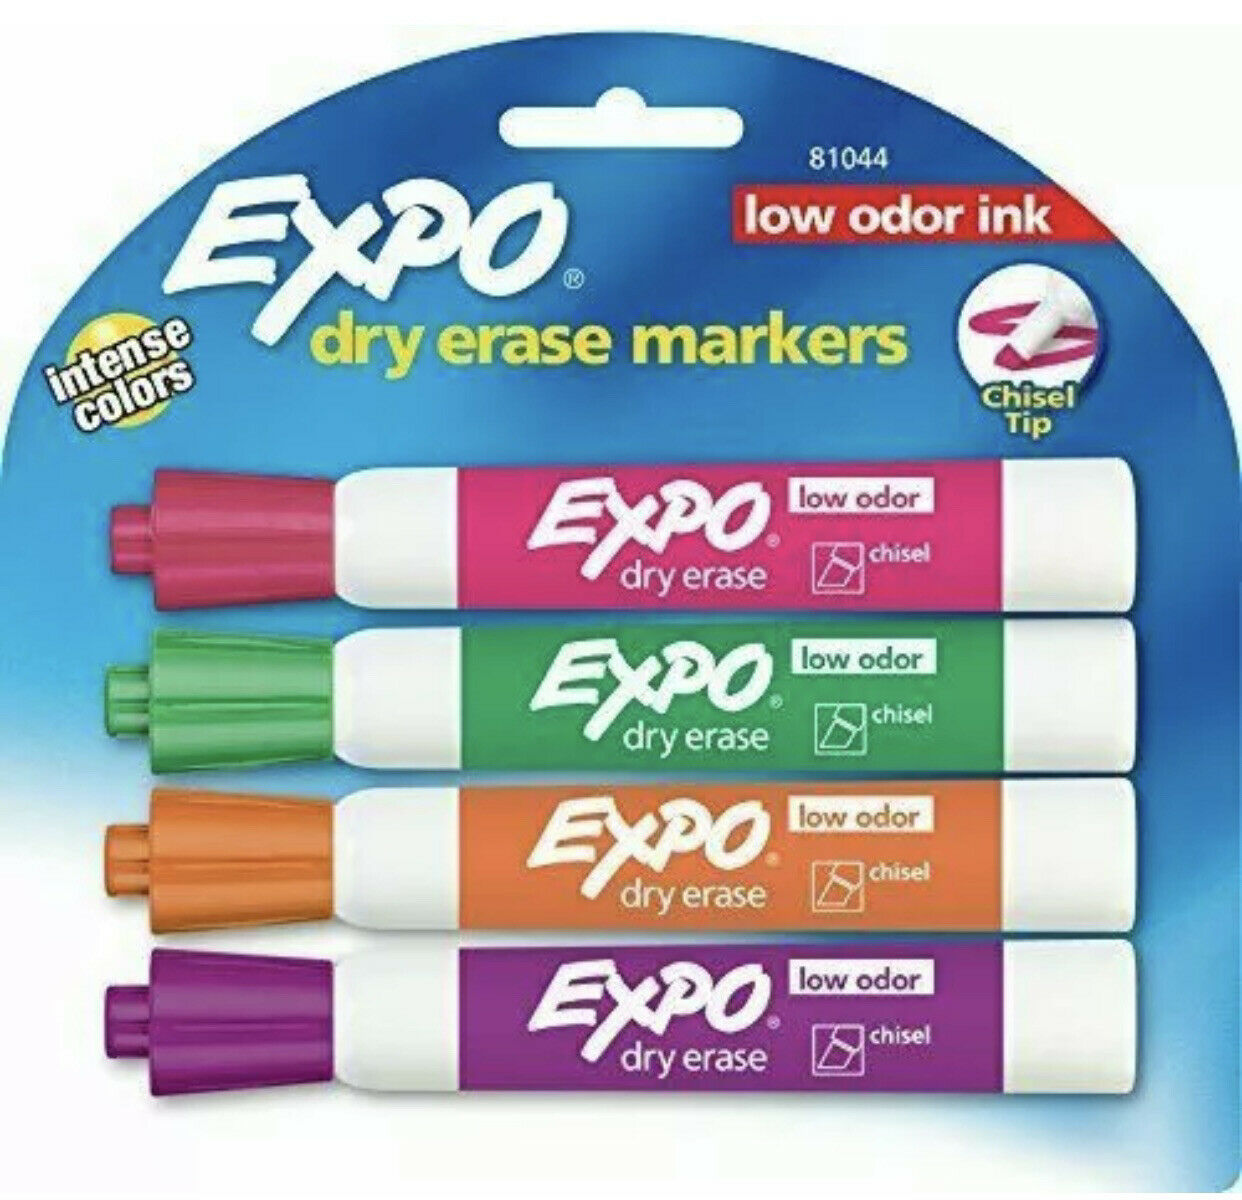 EXPO Low Odor Dry Erase Markers, Chisel Tip, Bright Colors, 4 Pack